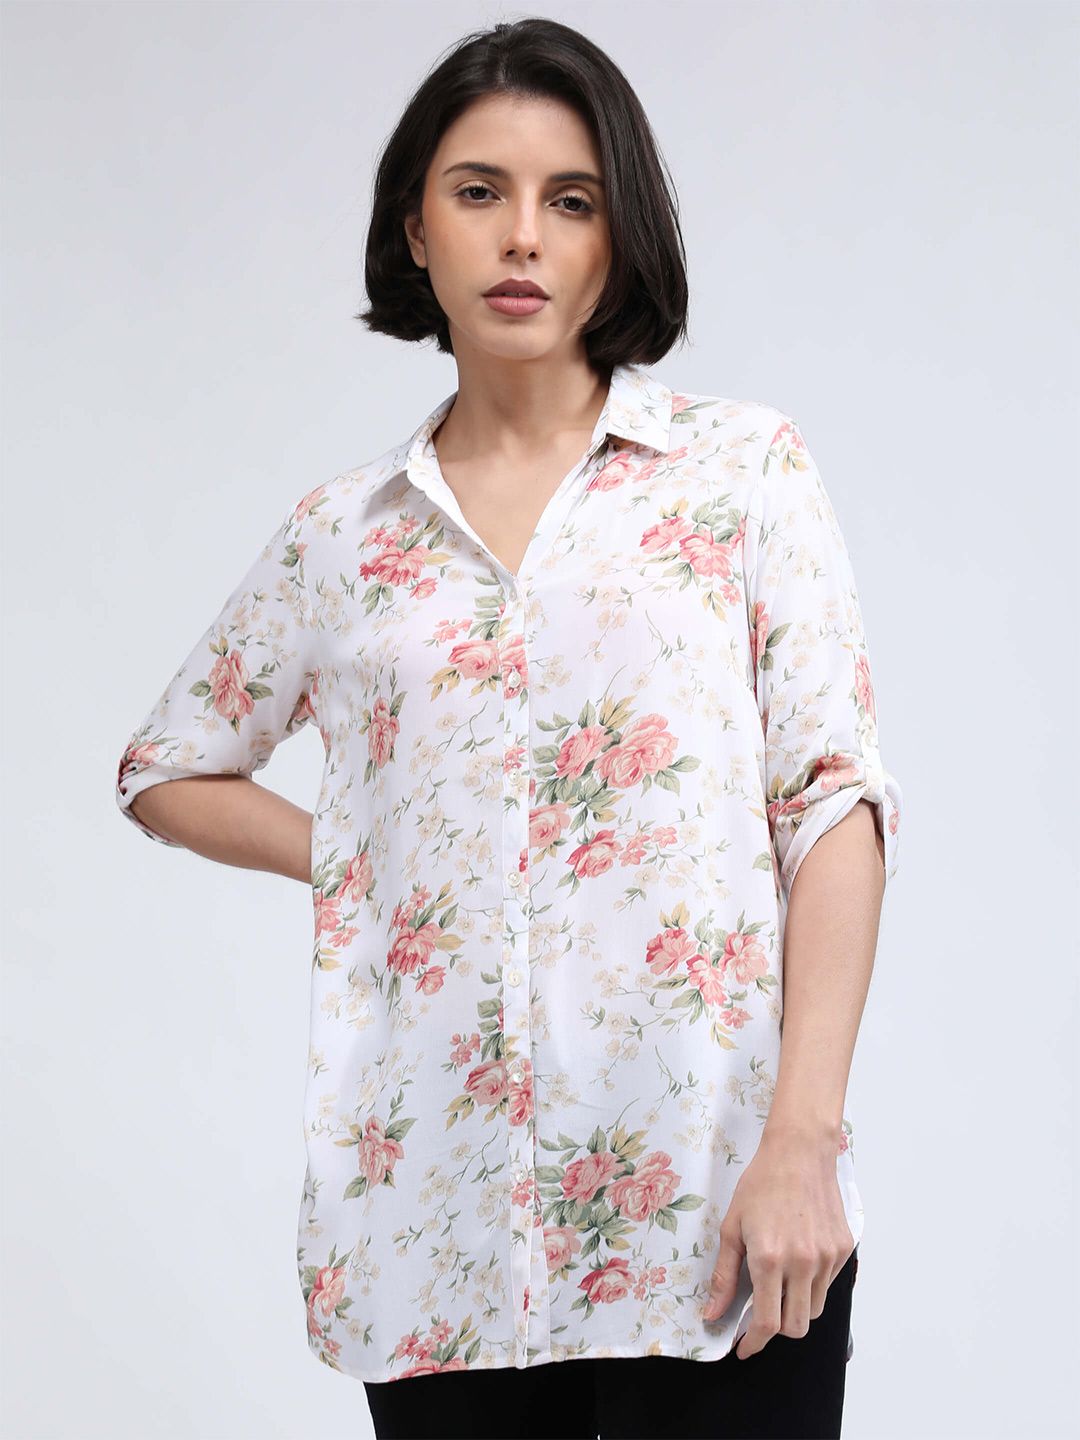 IDK Women White Floral Prined Shirt Style Top Price in India